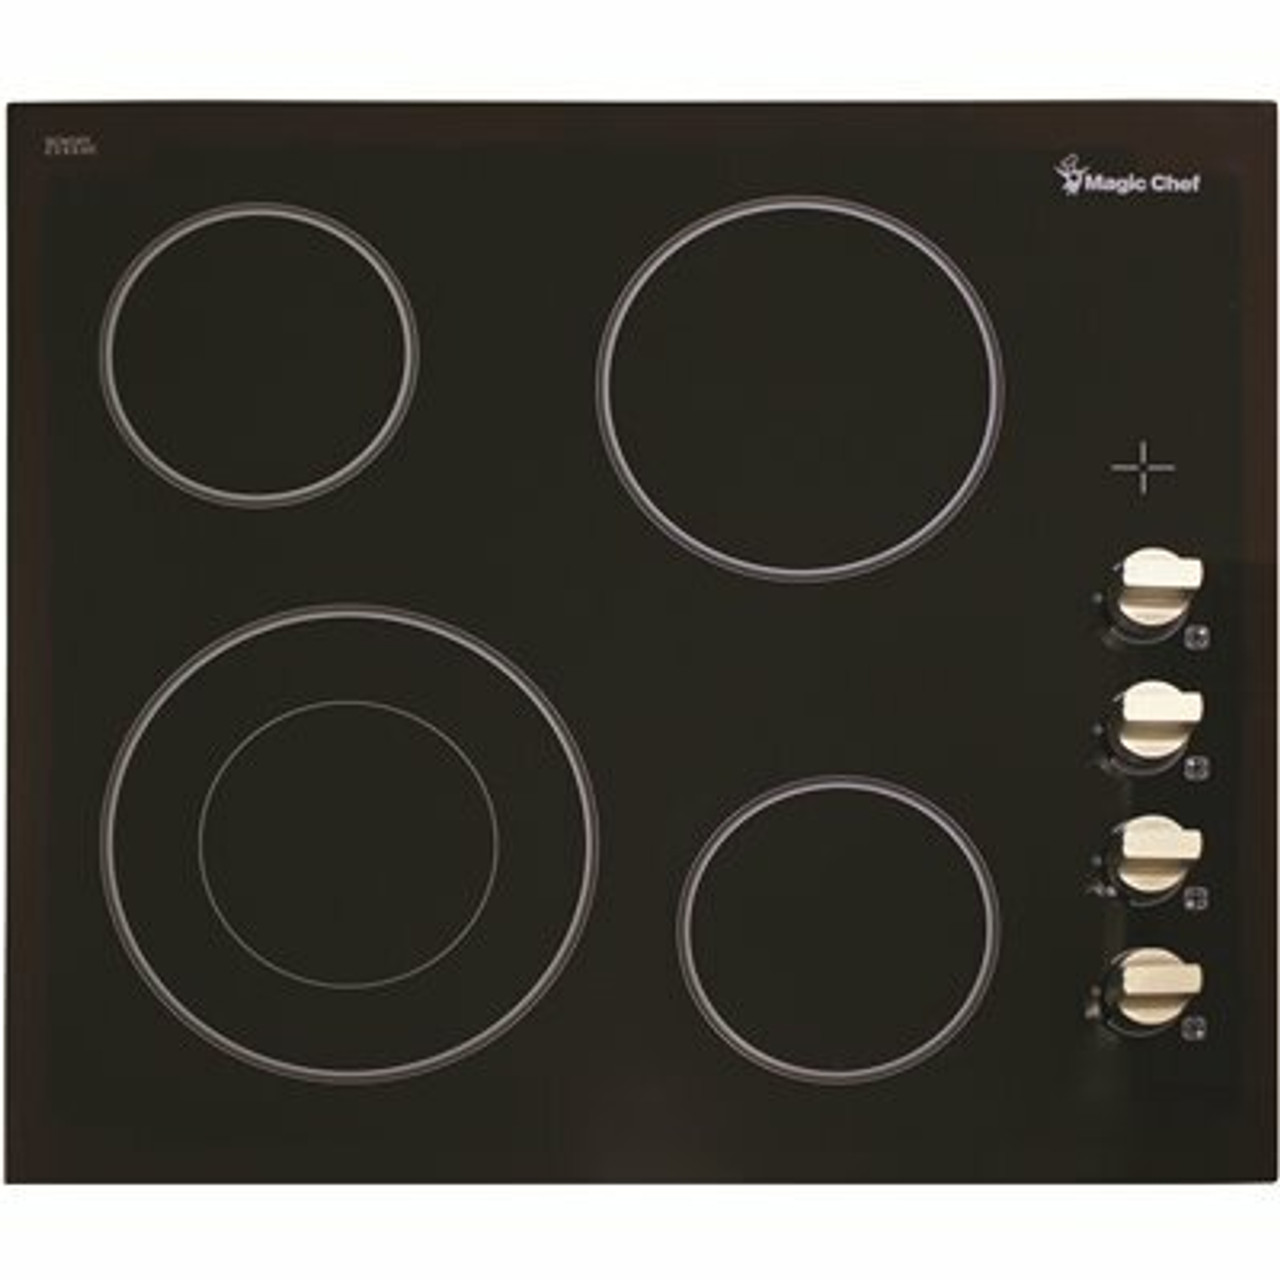 Magic Chef 24 In. Radiant Electric Cooktop In Black With 4 Elements